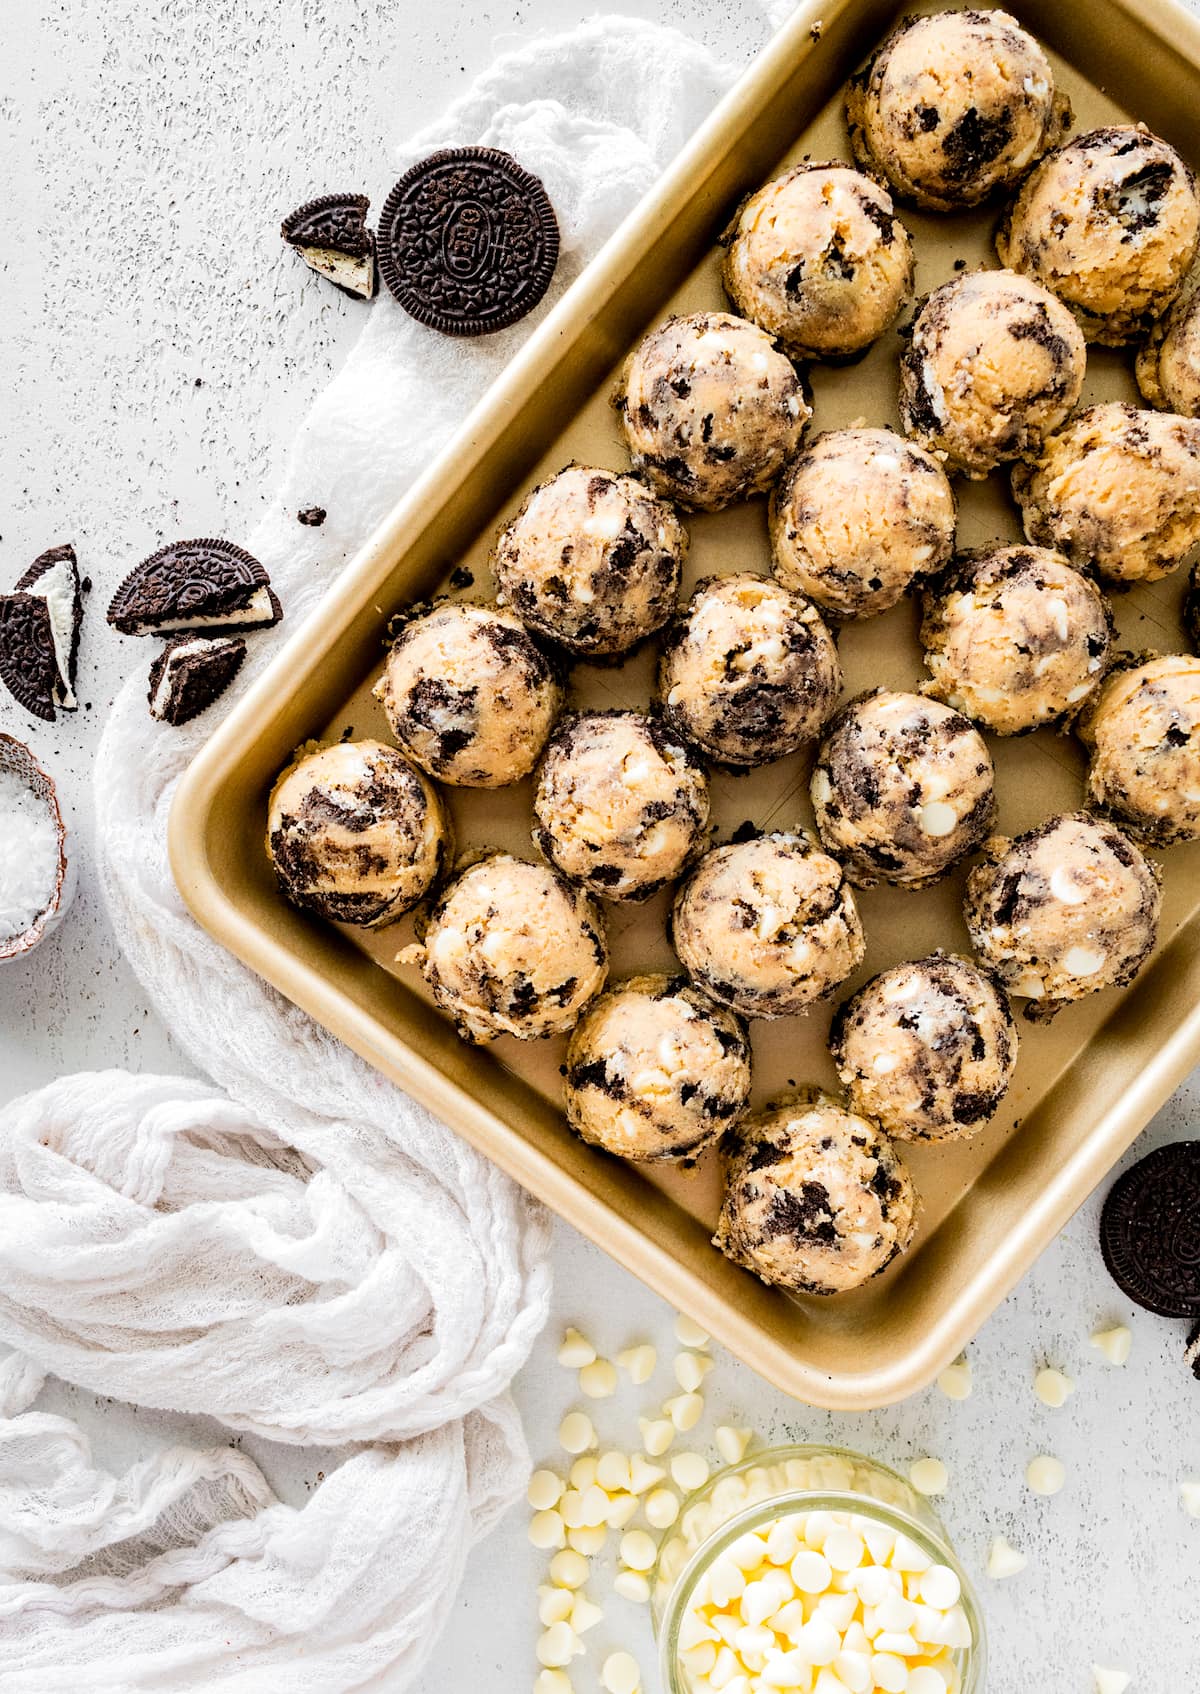 19 Must-Have Cookie Baking Essentials That I Swear By